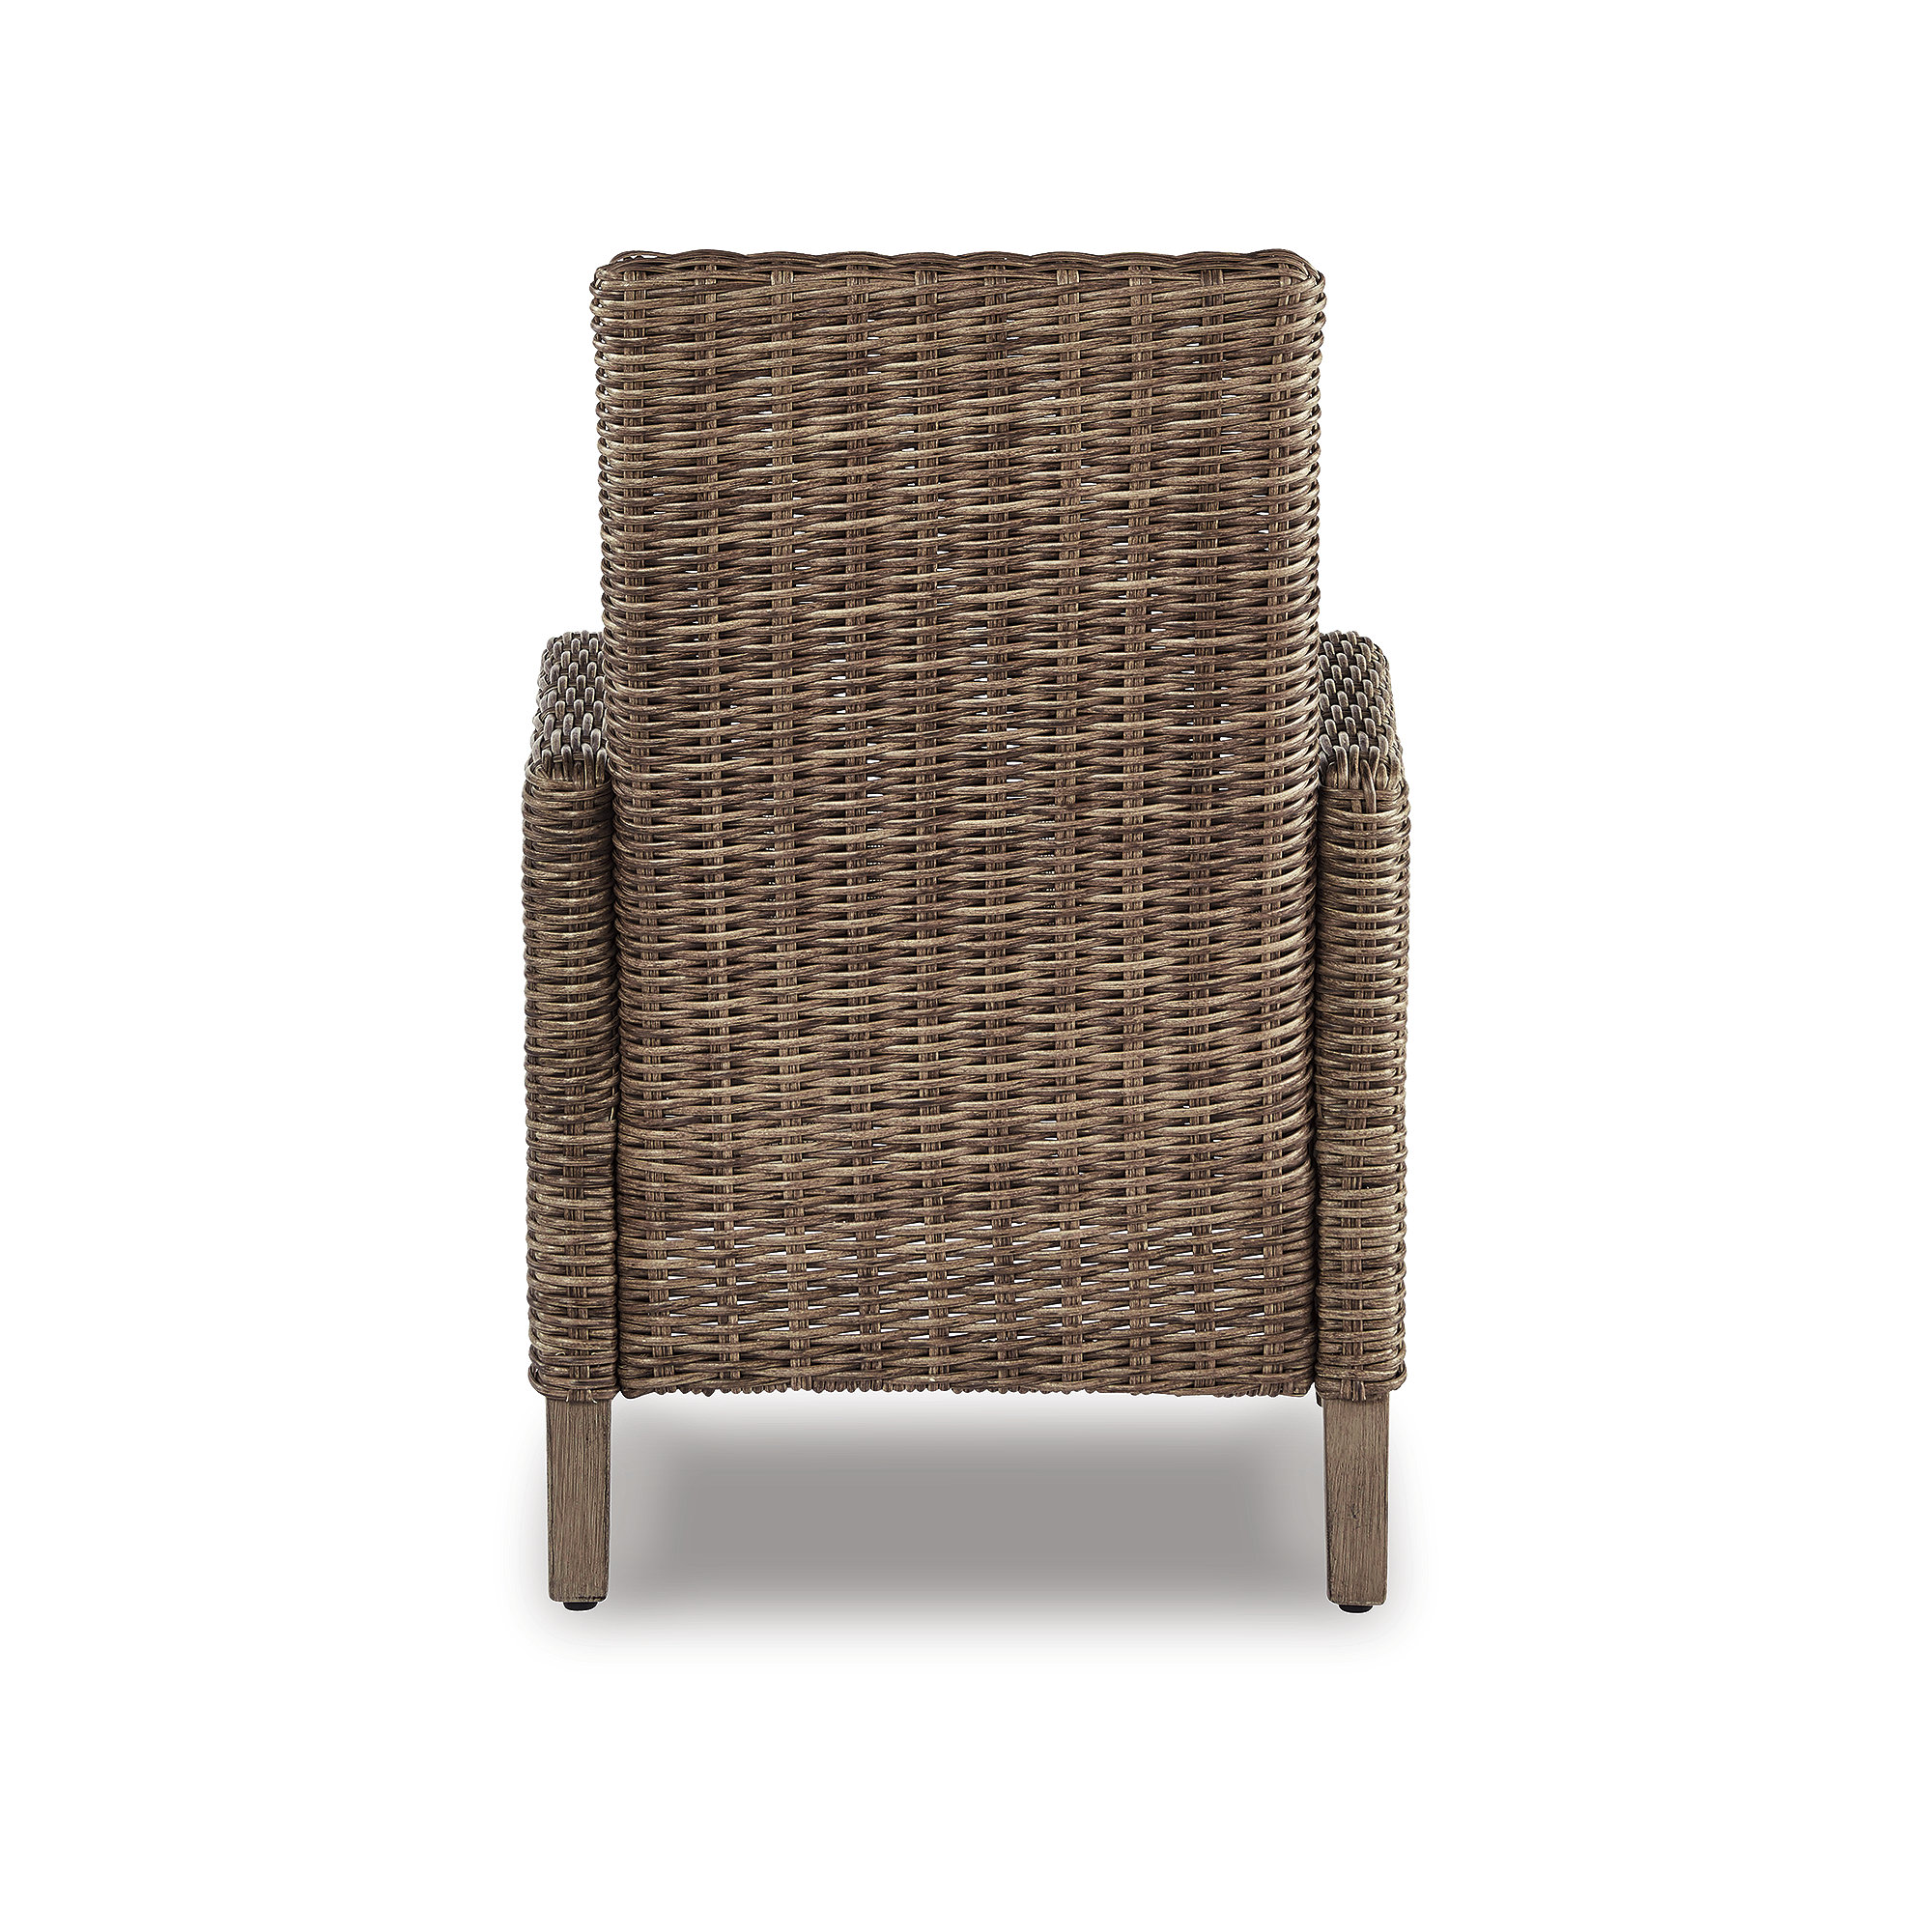 Signature Design by Ashley Casual Beachcroft Arm Chair with Cushion, Set of 2, Beige - image 3 of 4